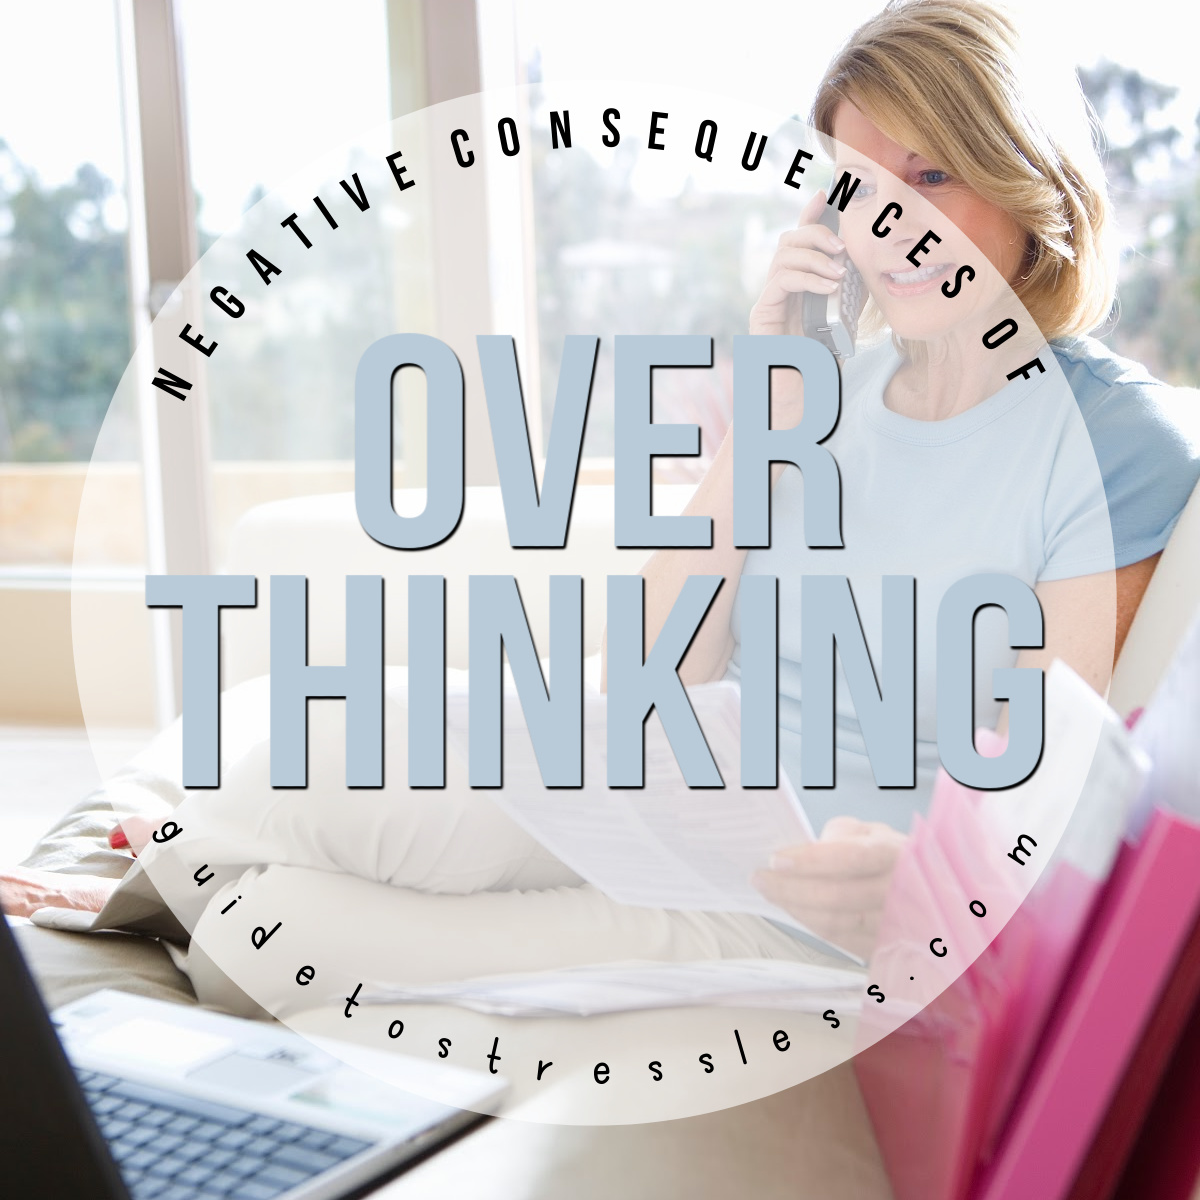 The Negative Consequences of Overthinking